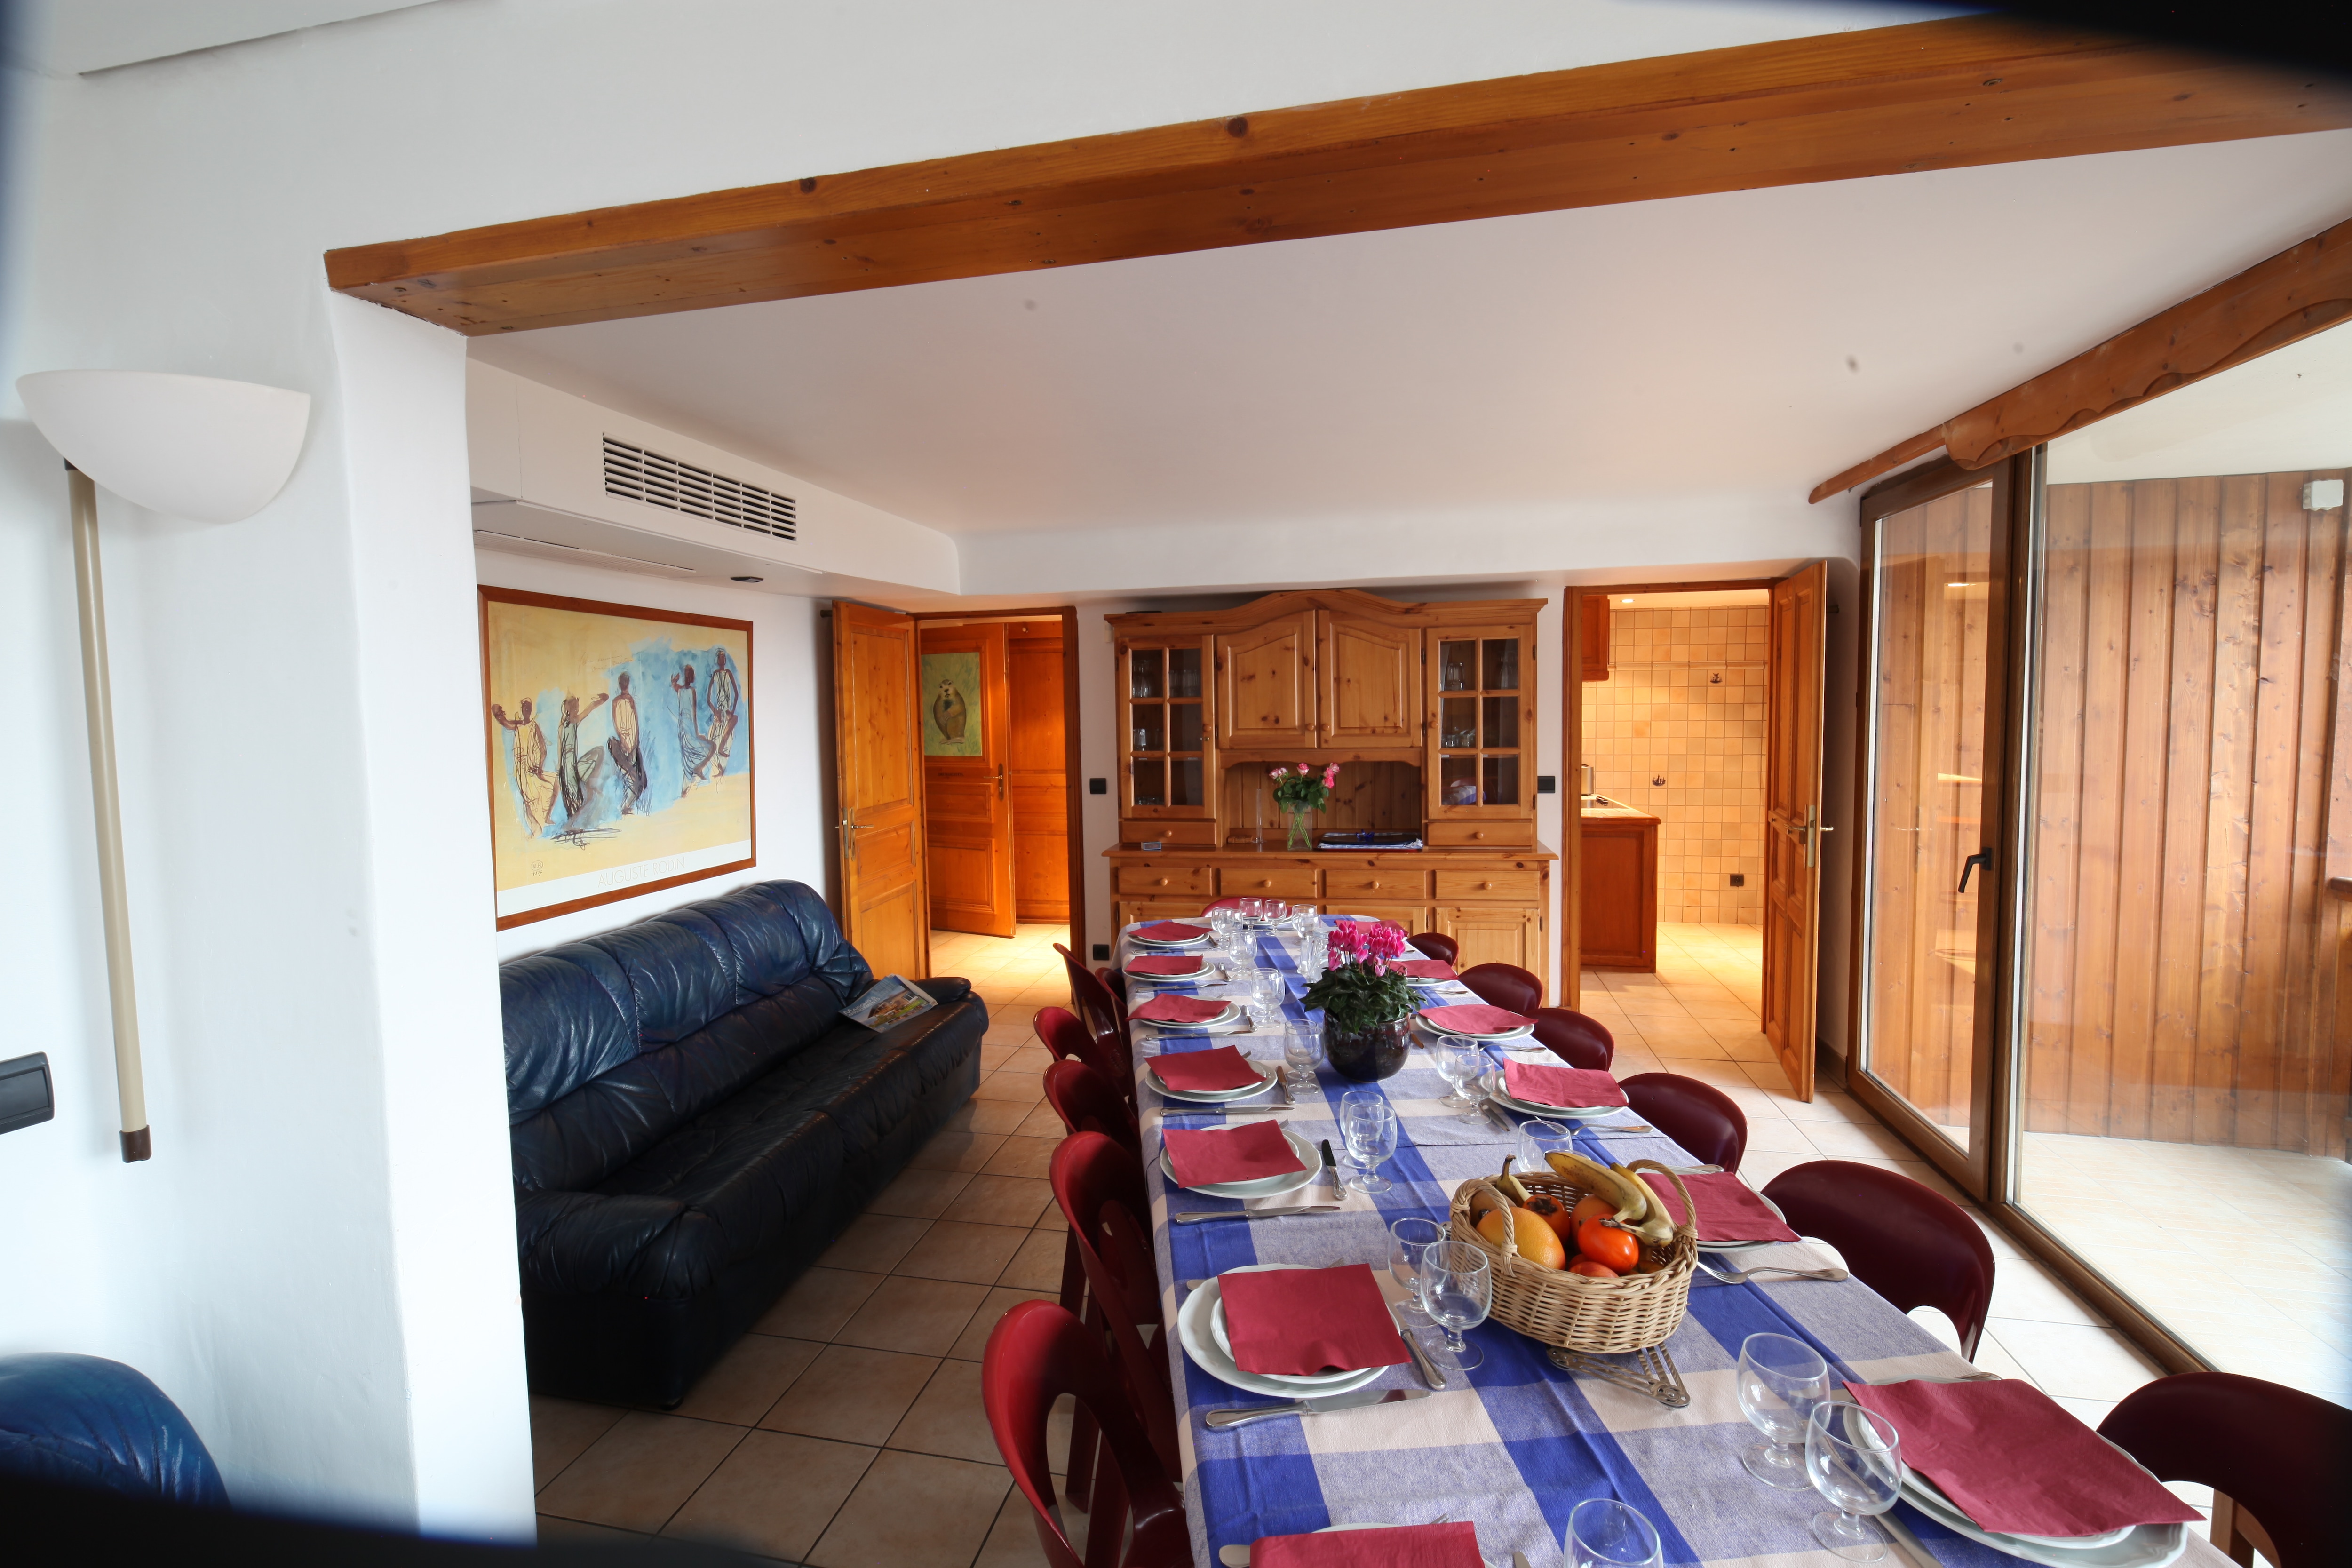 Property Image 1 - Chalet Ibex- Badger (14 to 18 people)